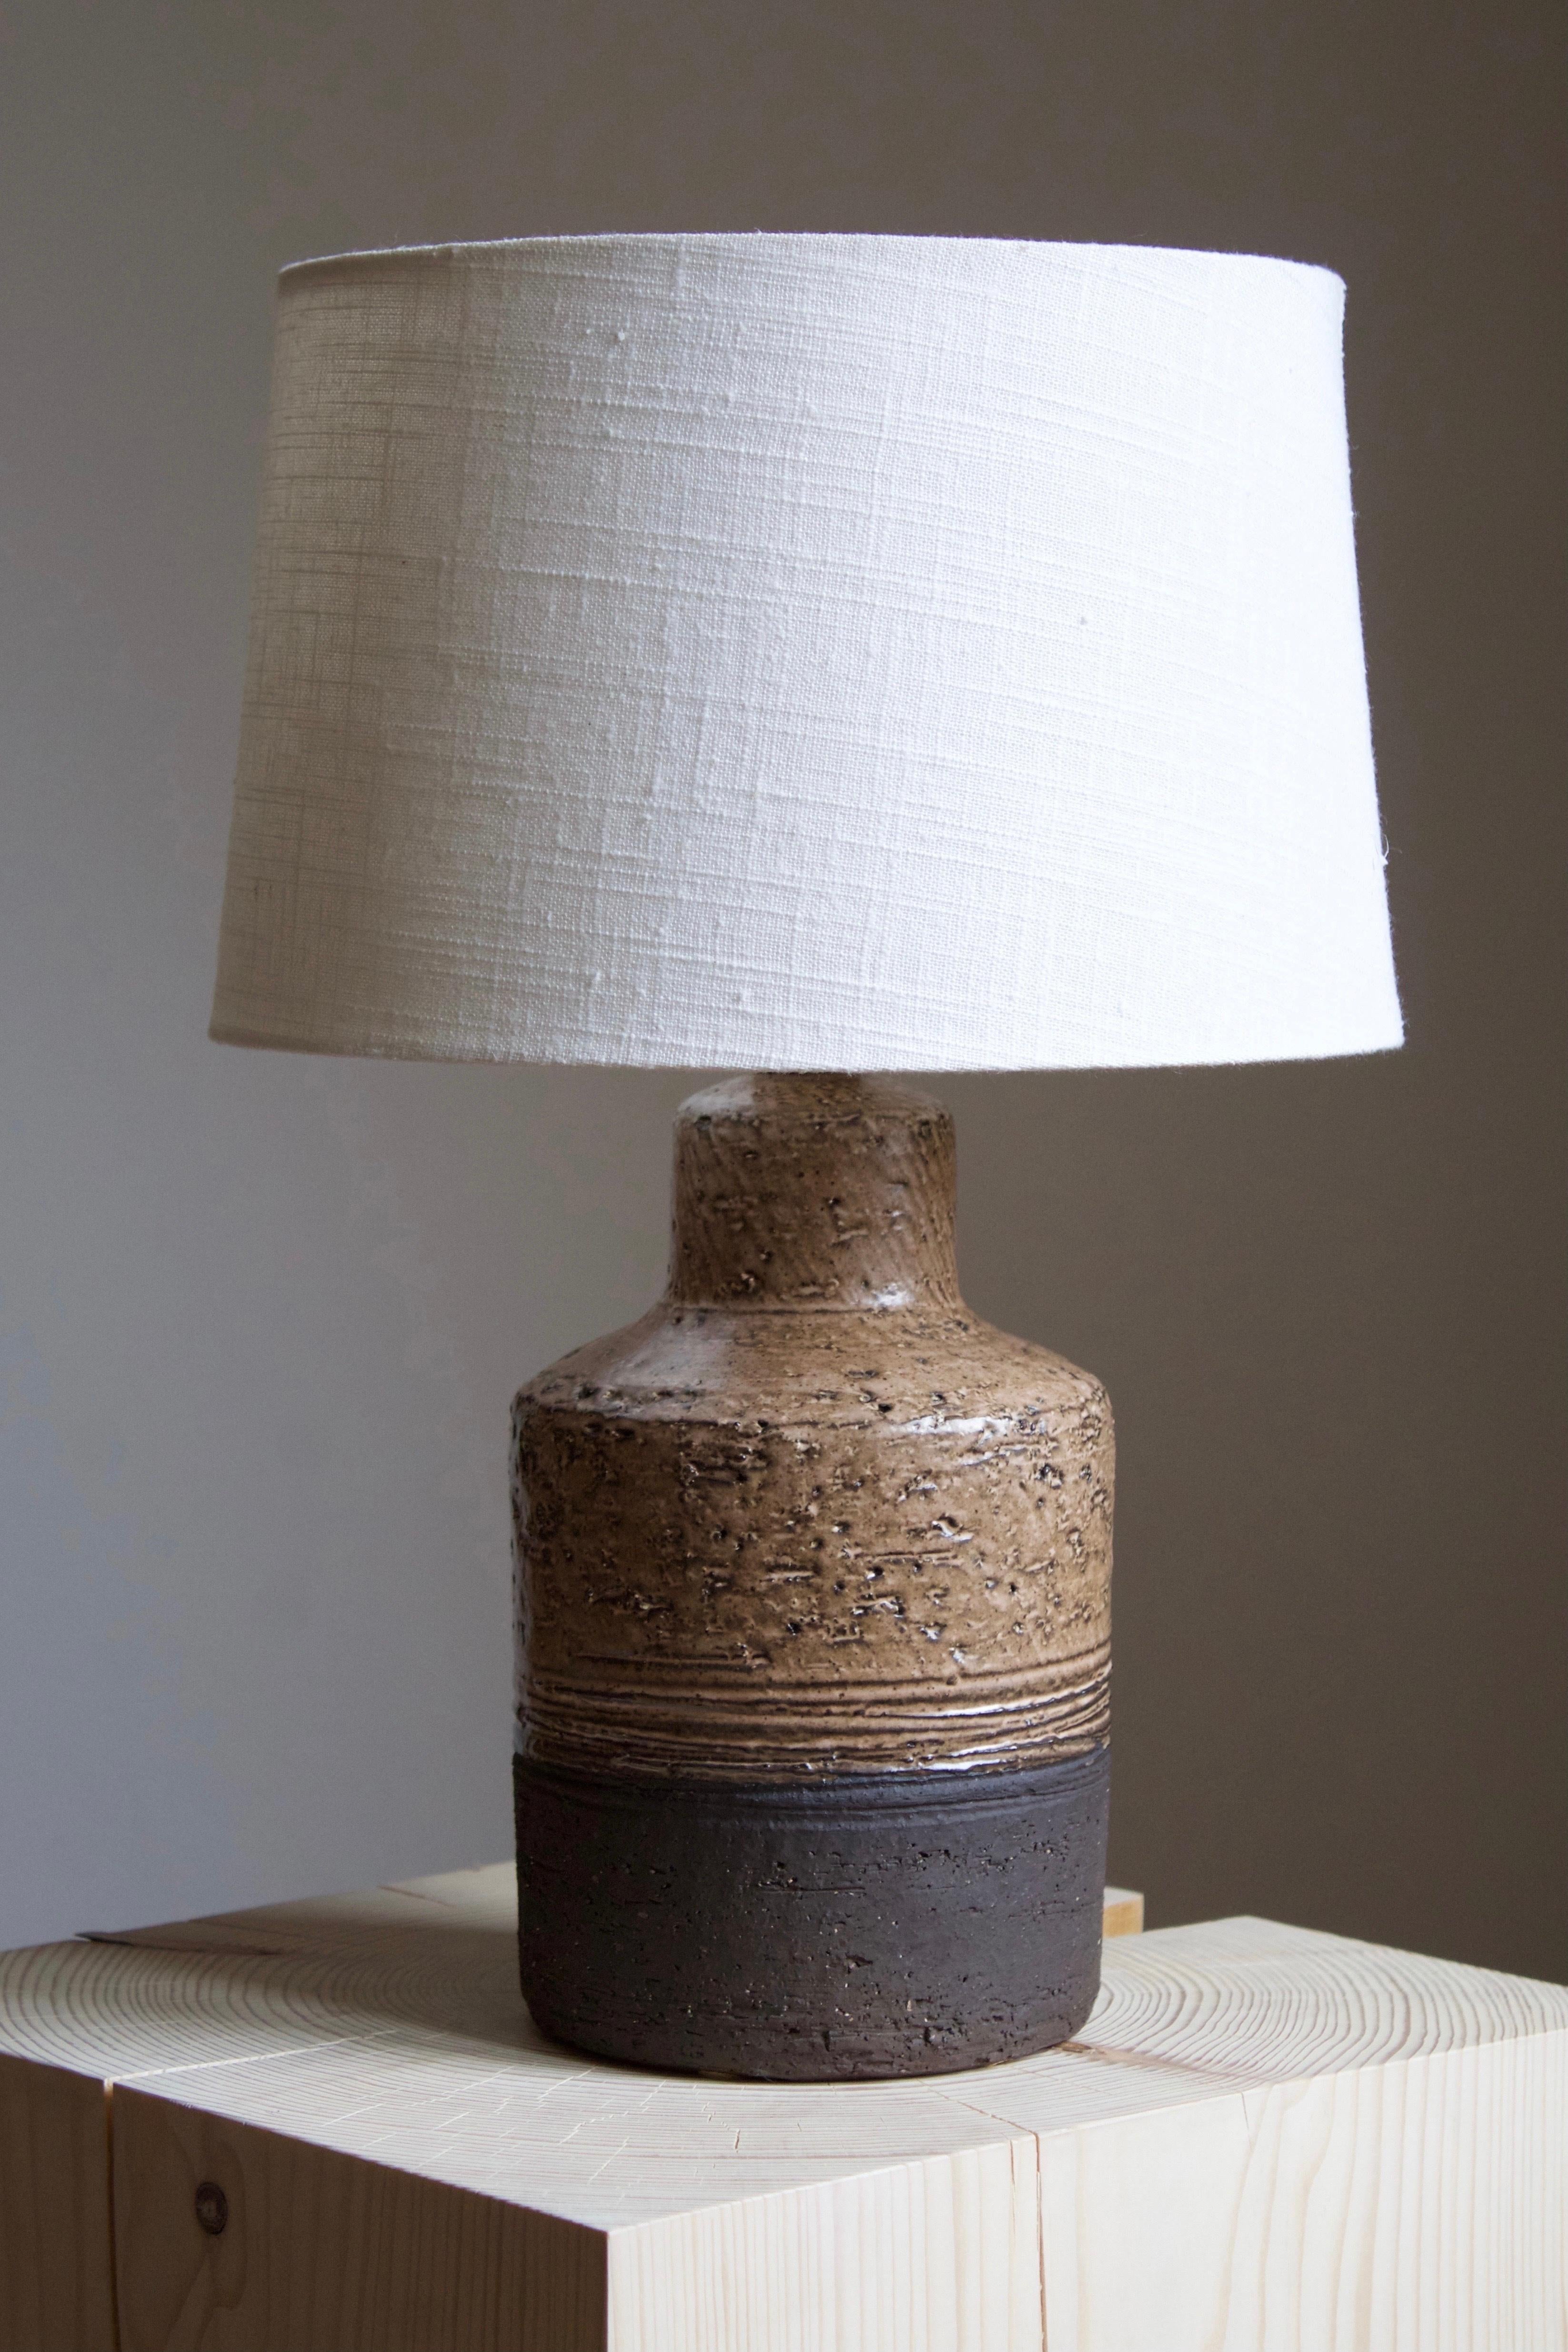 A table lamp, designed and produced by Robert Bentsen, in his studio, Denmark, 1960s. 

Sold without lampshade. Stated dimensions exclude the lampshade.

Glaze features brown-grey colors.